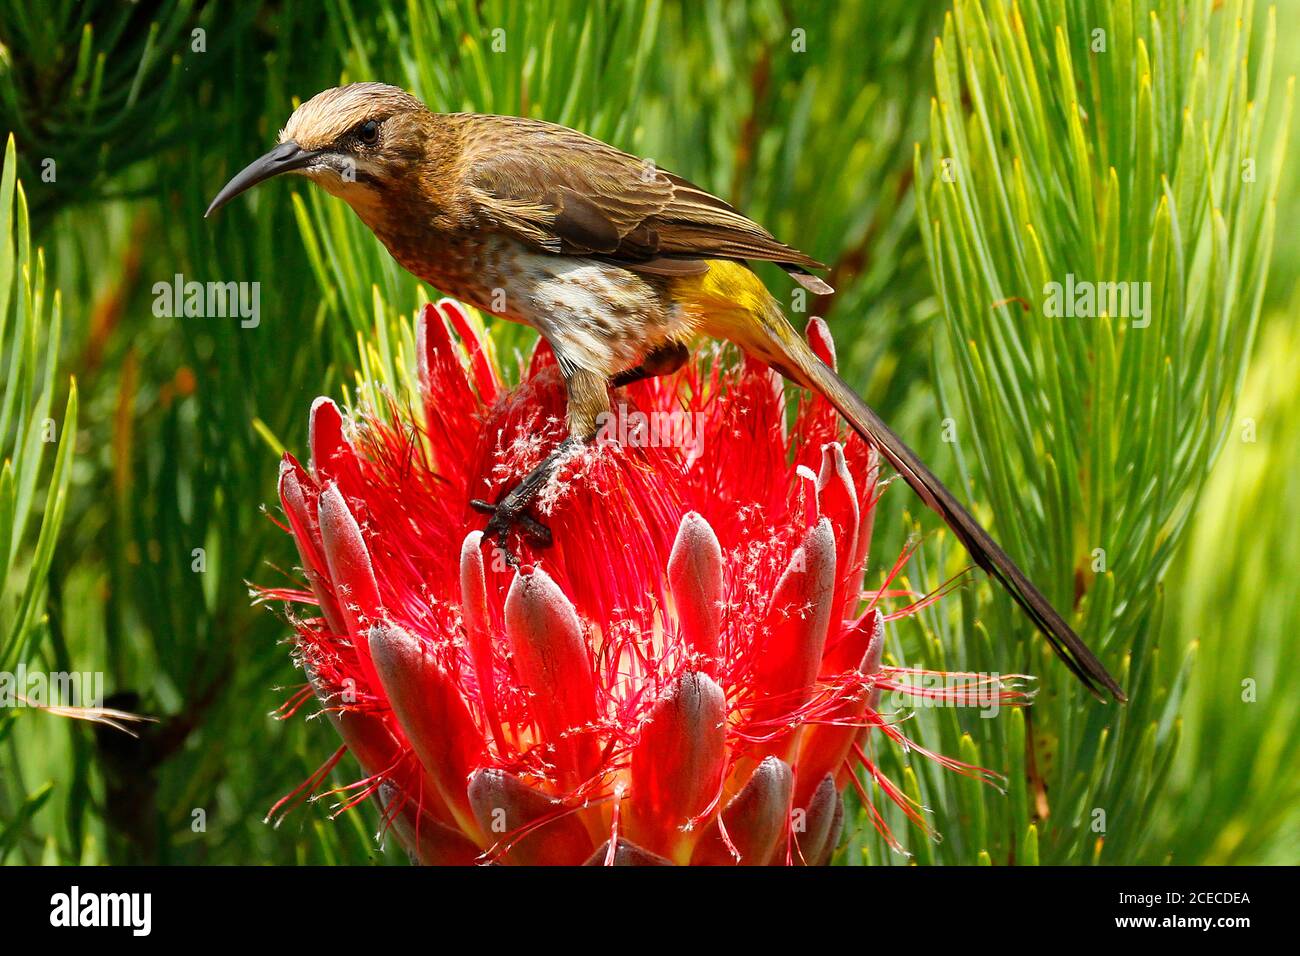 A female Cape sugarbird feeding on the nectar deep inside a protea flower-head. The males of this species have very long tails. Stock Photo